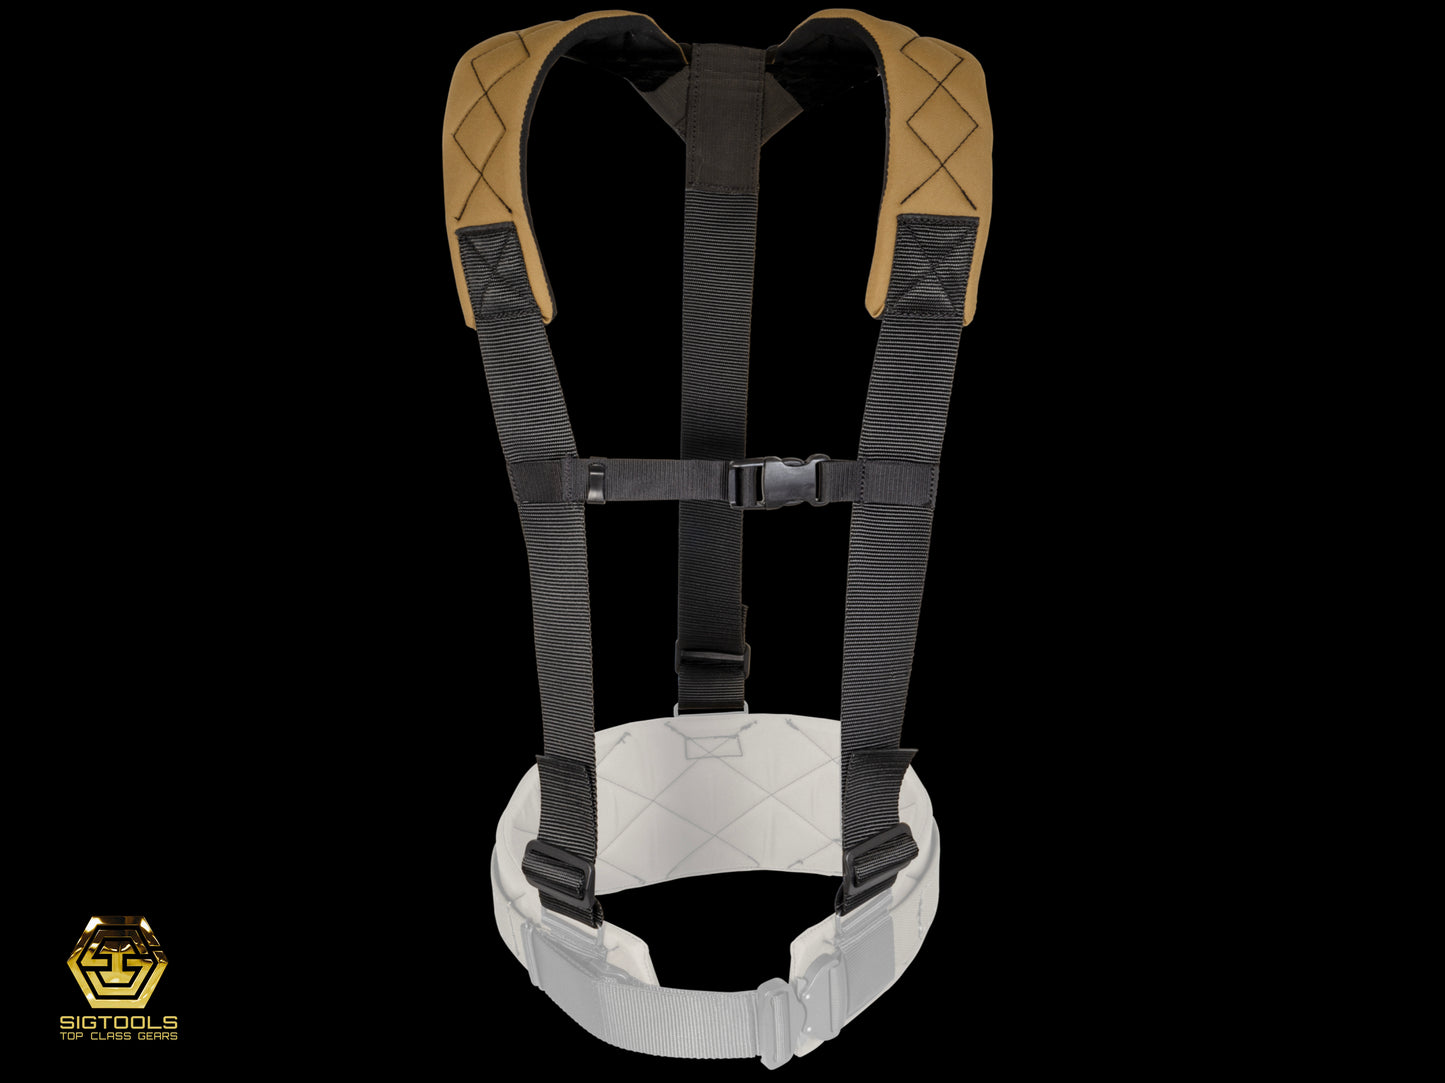 Front look of a pair of Sawdust sage-colored suspenders from the Badger brand, note that the belt is not included, designed to provide comfortable support and style while working.